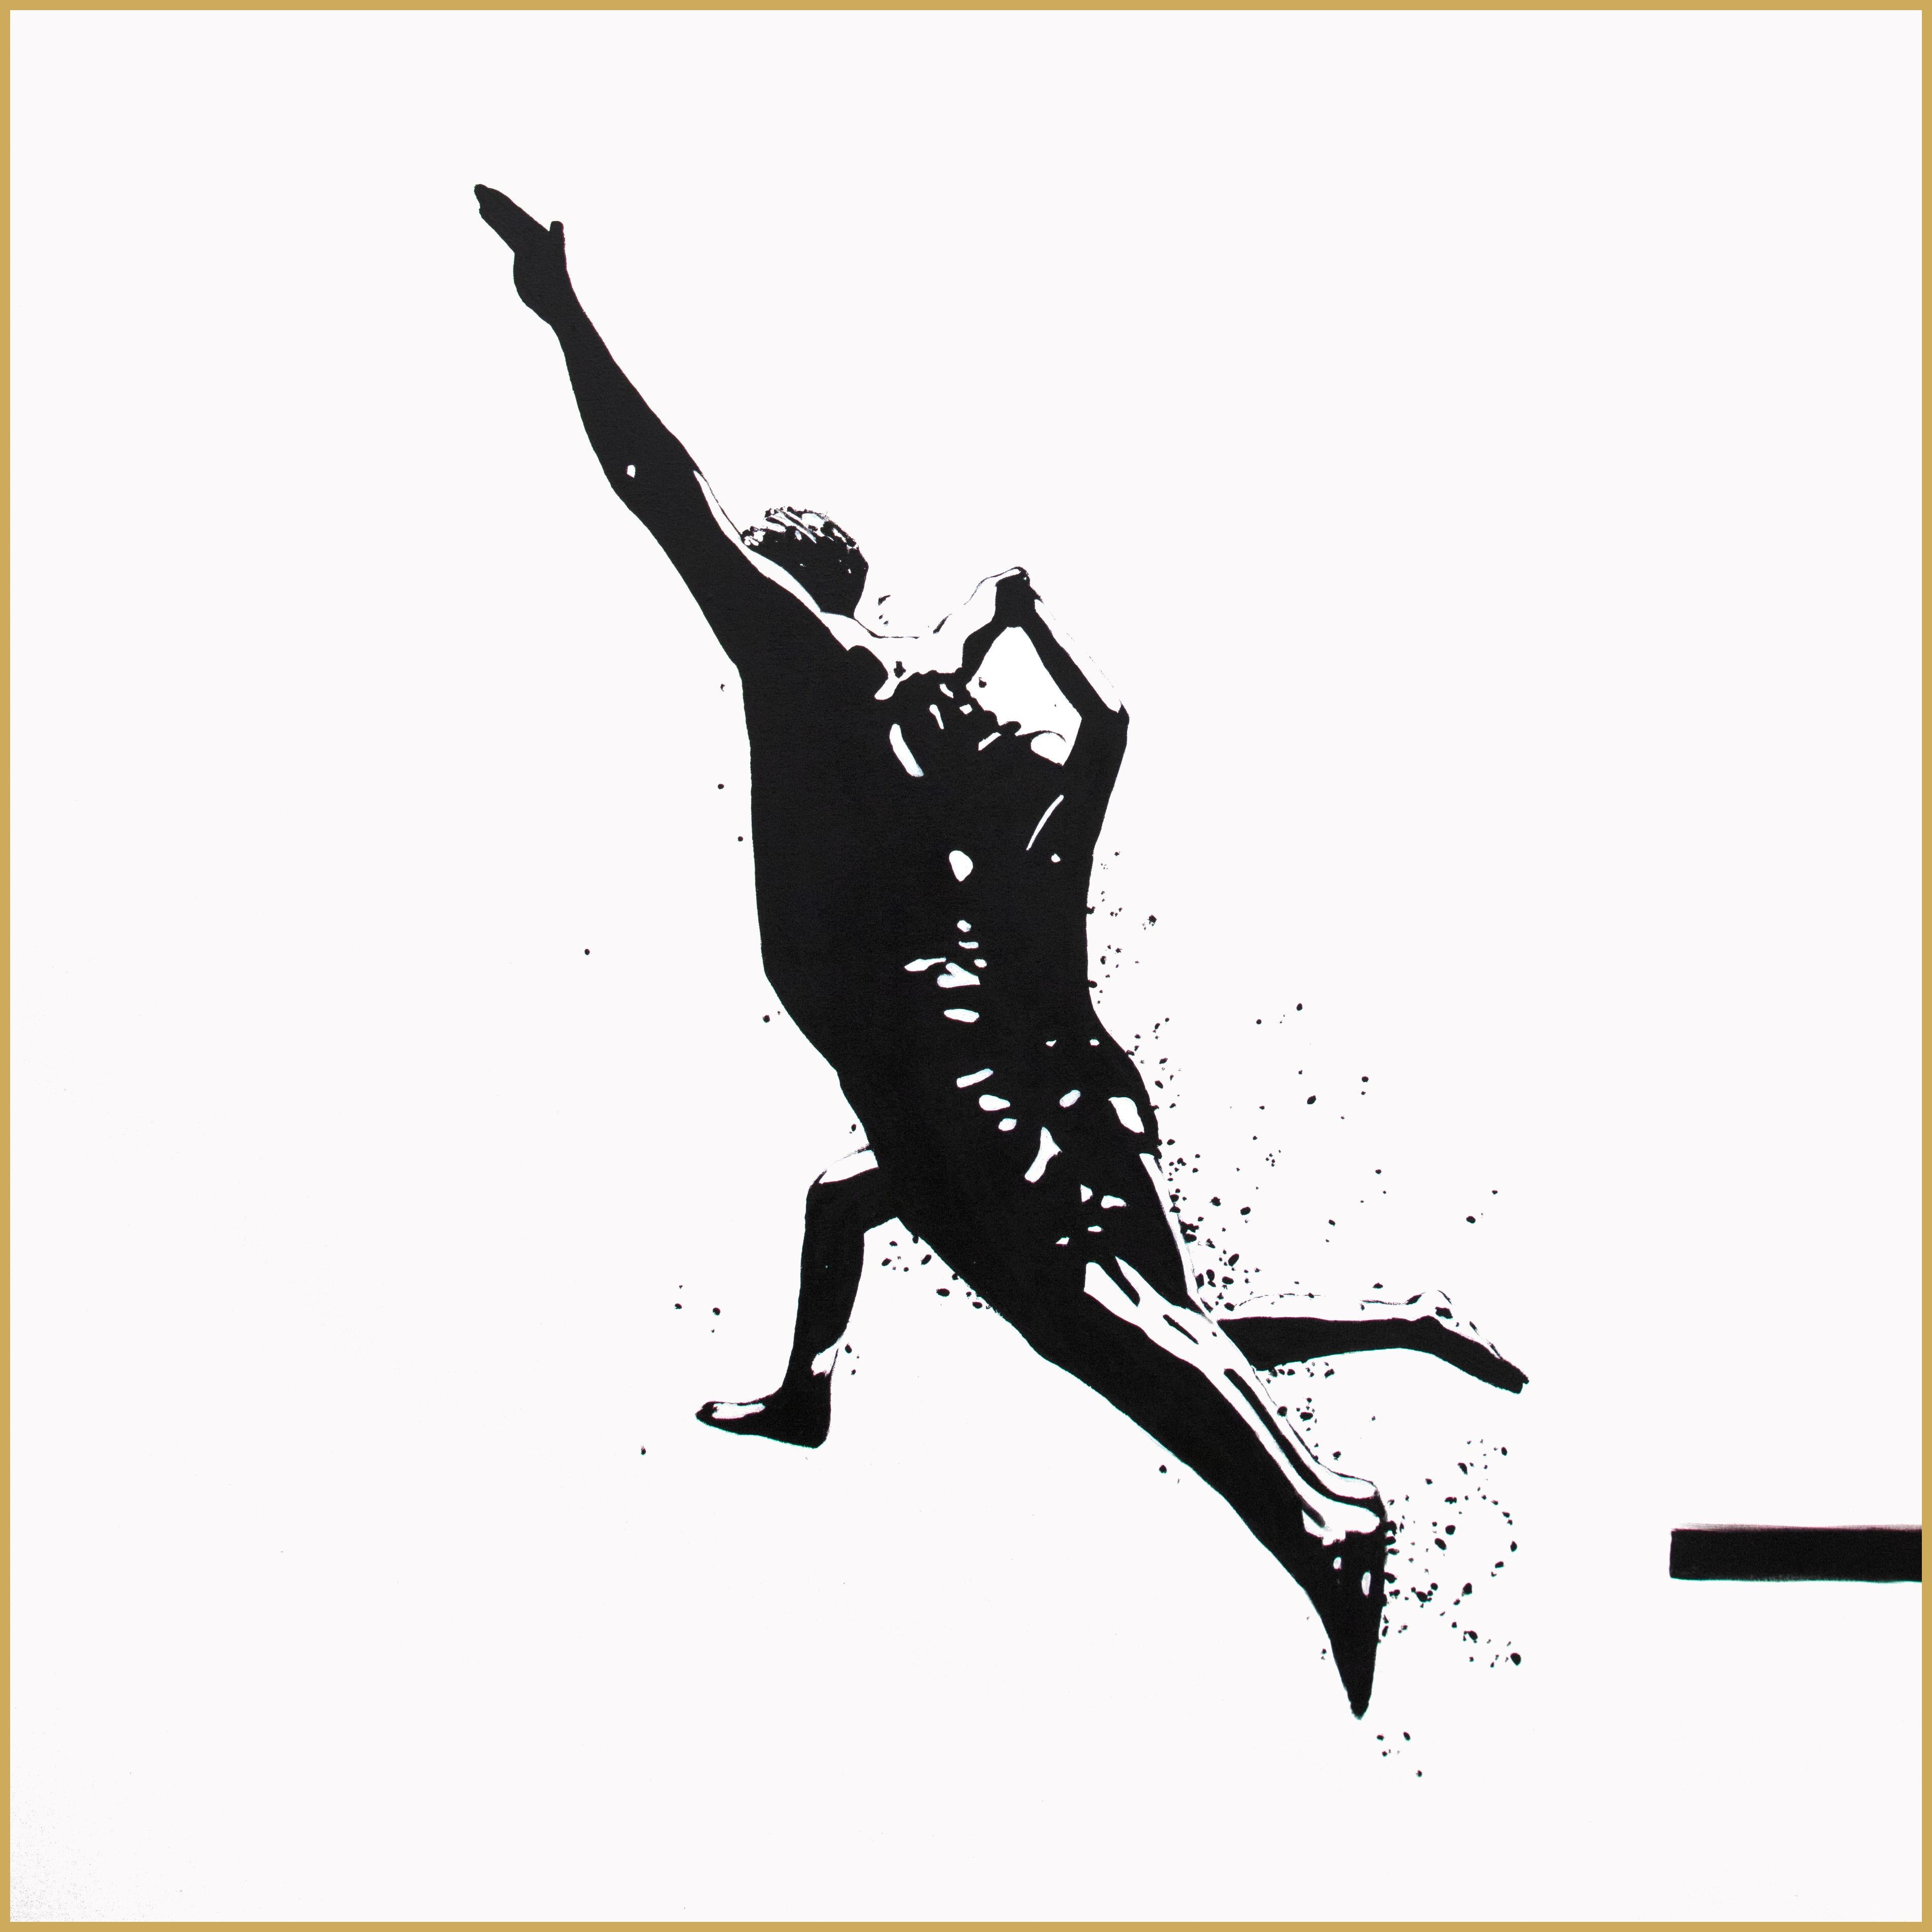 Eric Zener Figurative Painting - LAUNCHING - Contemporary Figurative Pop Art / Black and White Silhouette